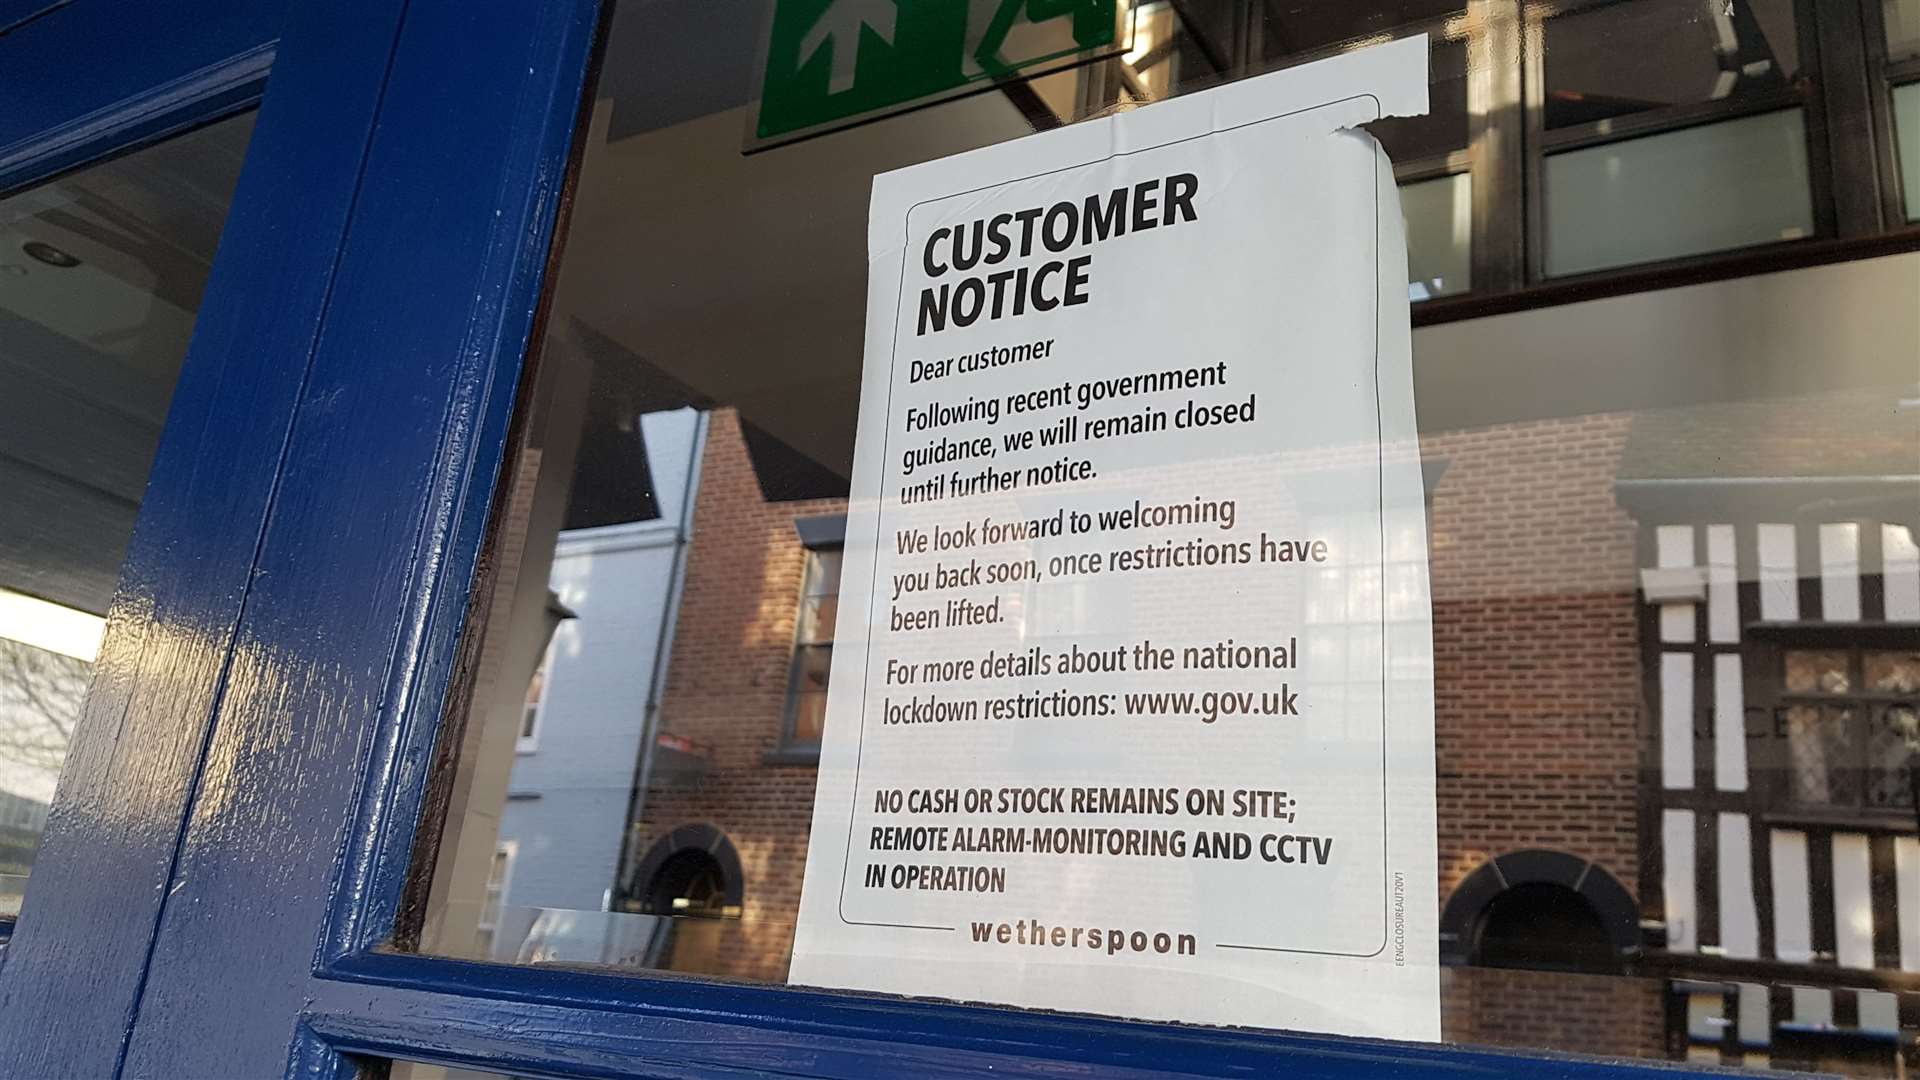 The Thomas Ingoldsby Wetherspoon pub in Canterbury was forced to stay shut in Christmas 2020 - while the city's Plum Pudding Riots were sparked by an order to keep shops open